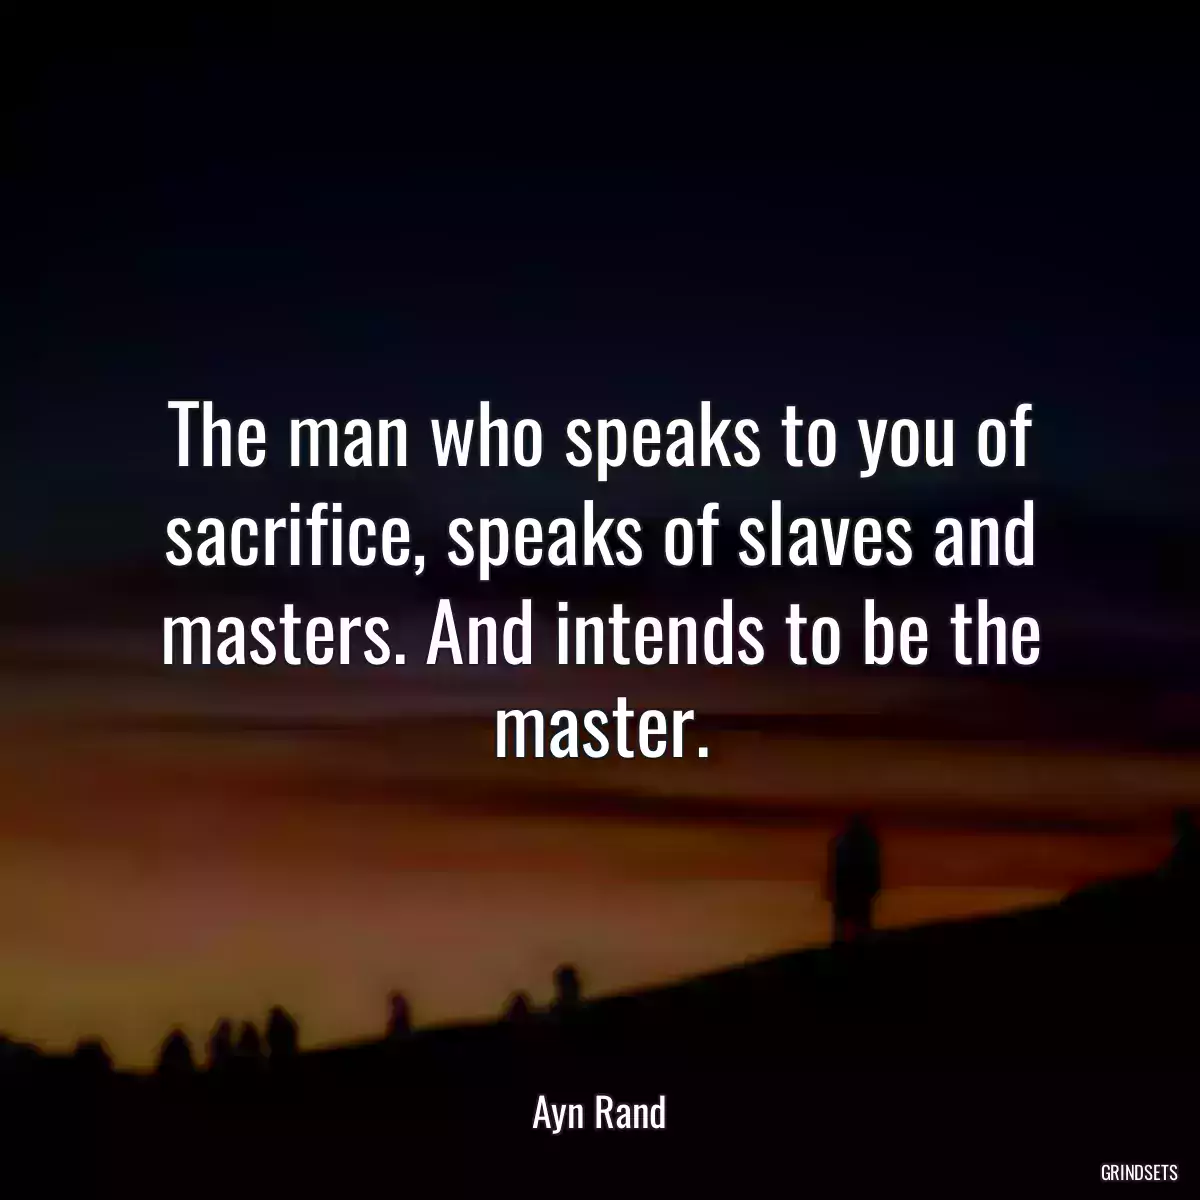 The man who speaks to you of sacrifice, speaks of slaves and masters. And intends to be the master.